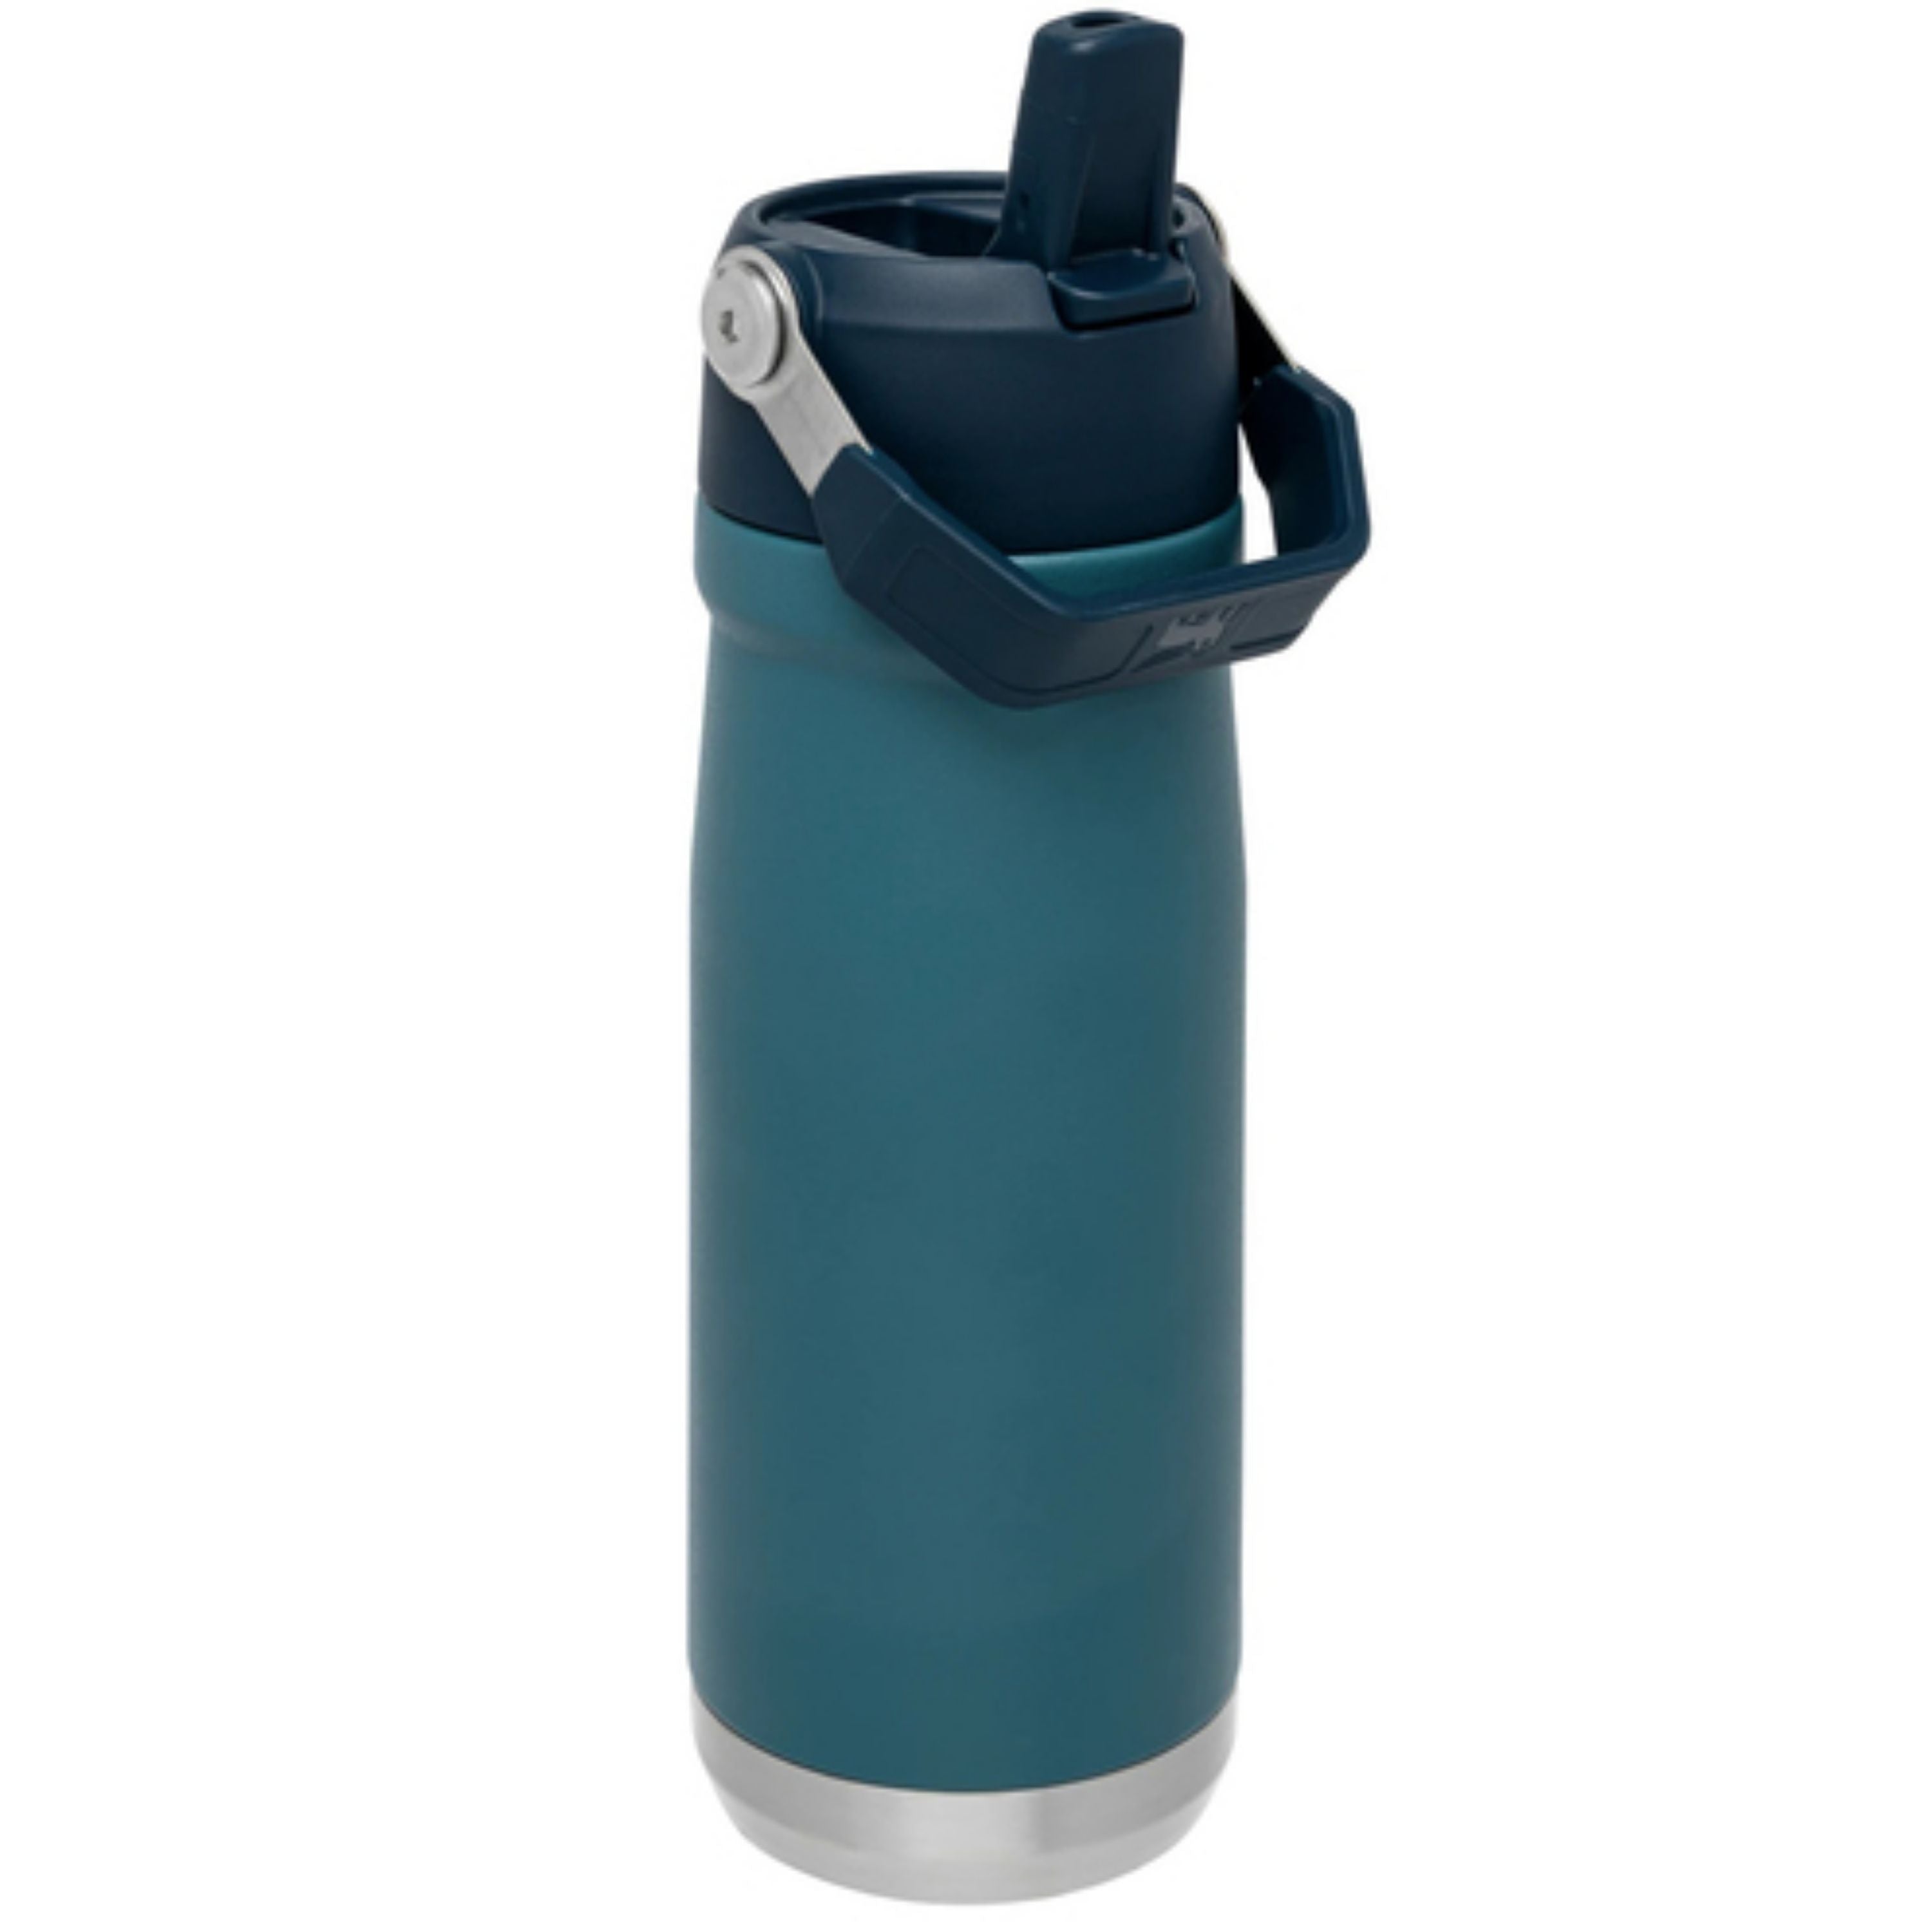 Insulated bottle flip straw "The iceflow" 22 oz